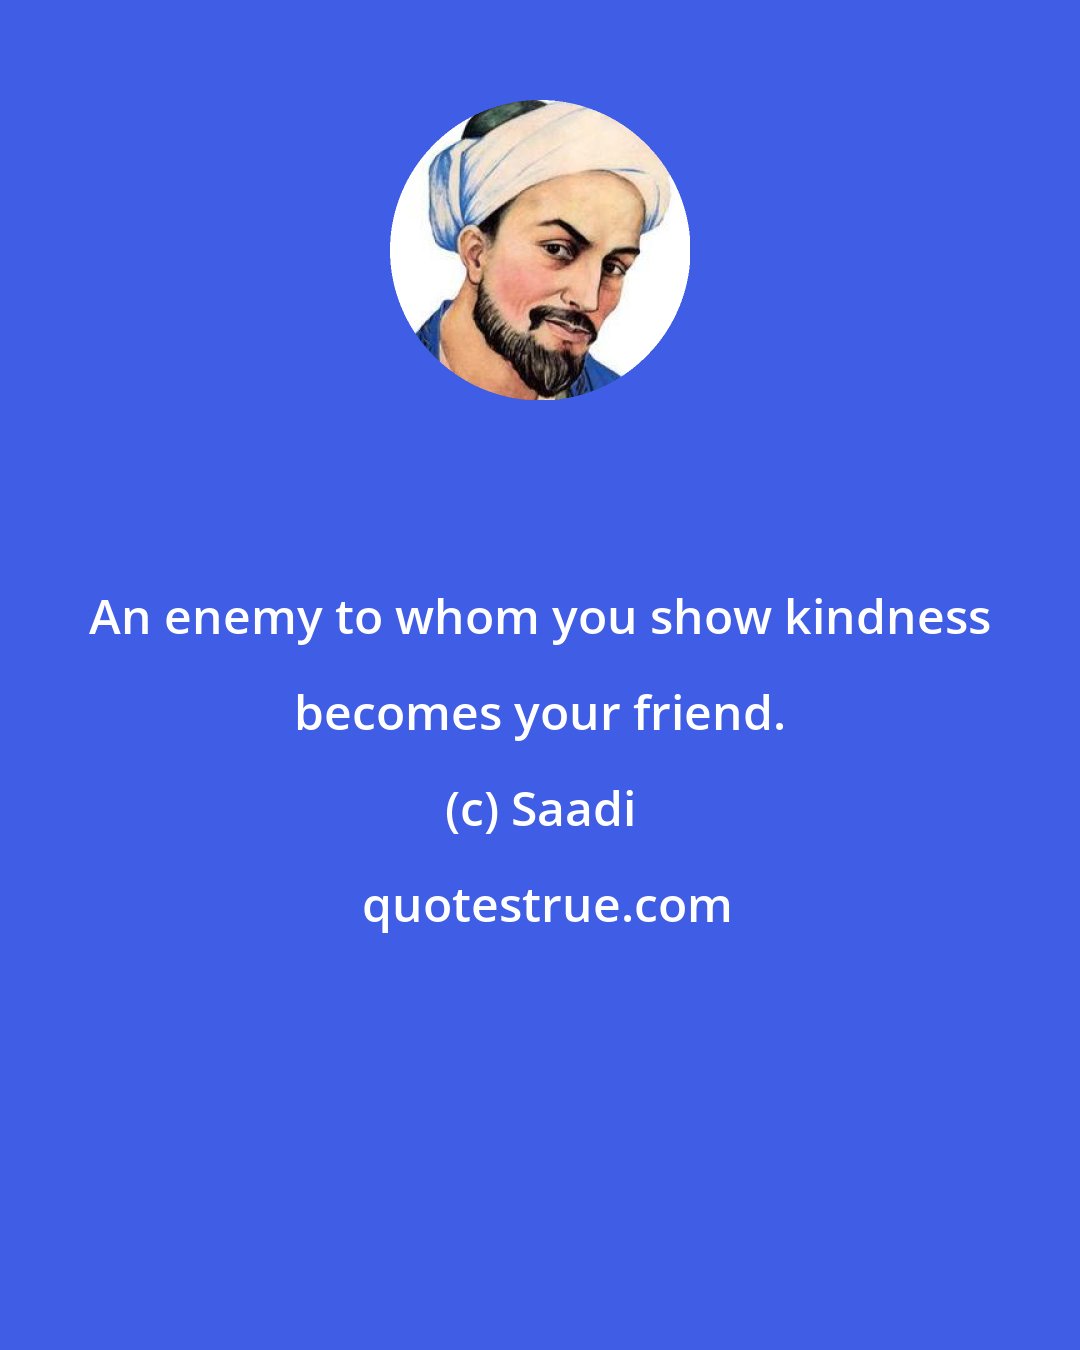 Saadi: An enemy to whom you show kindness becomes your friend.